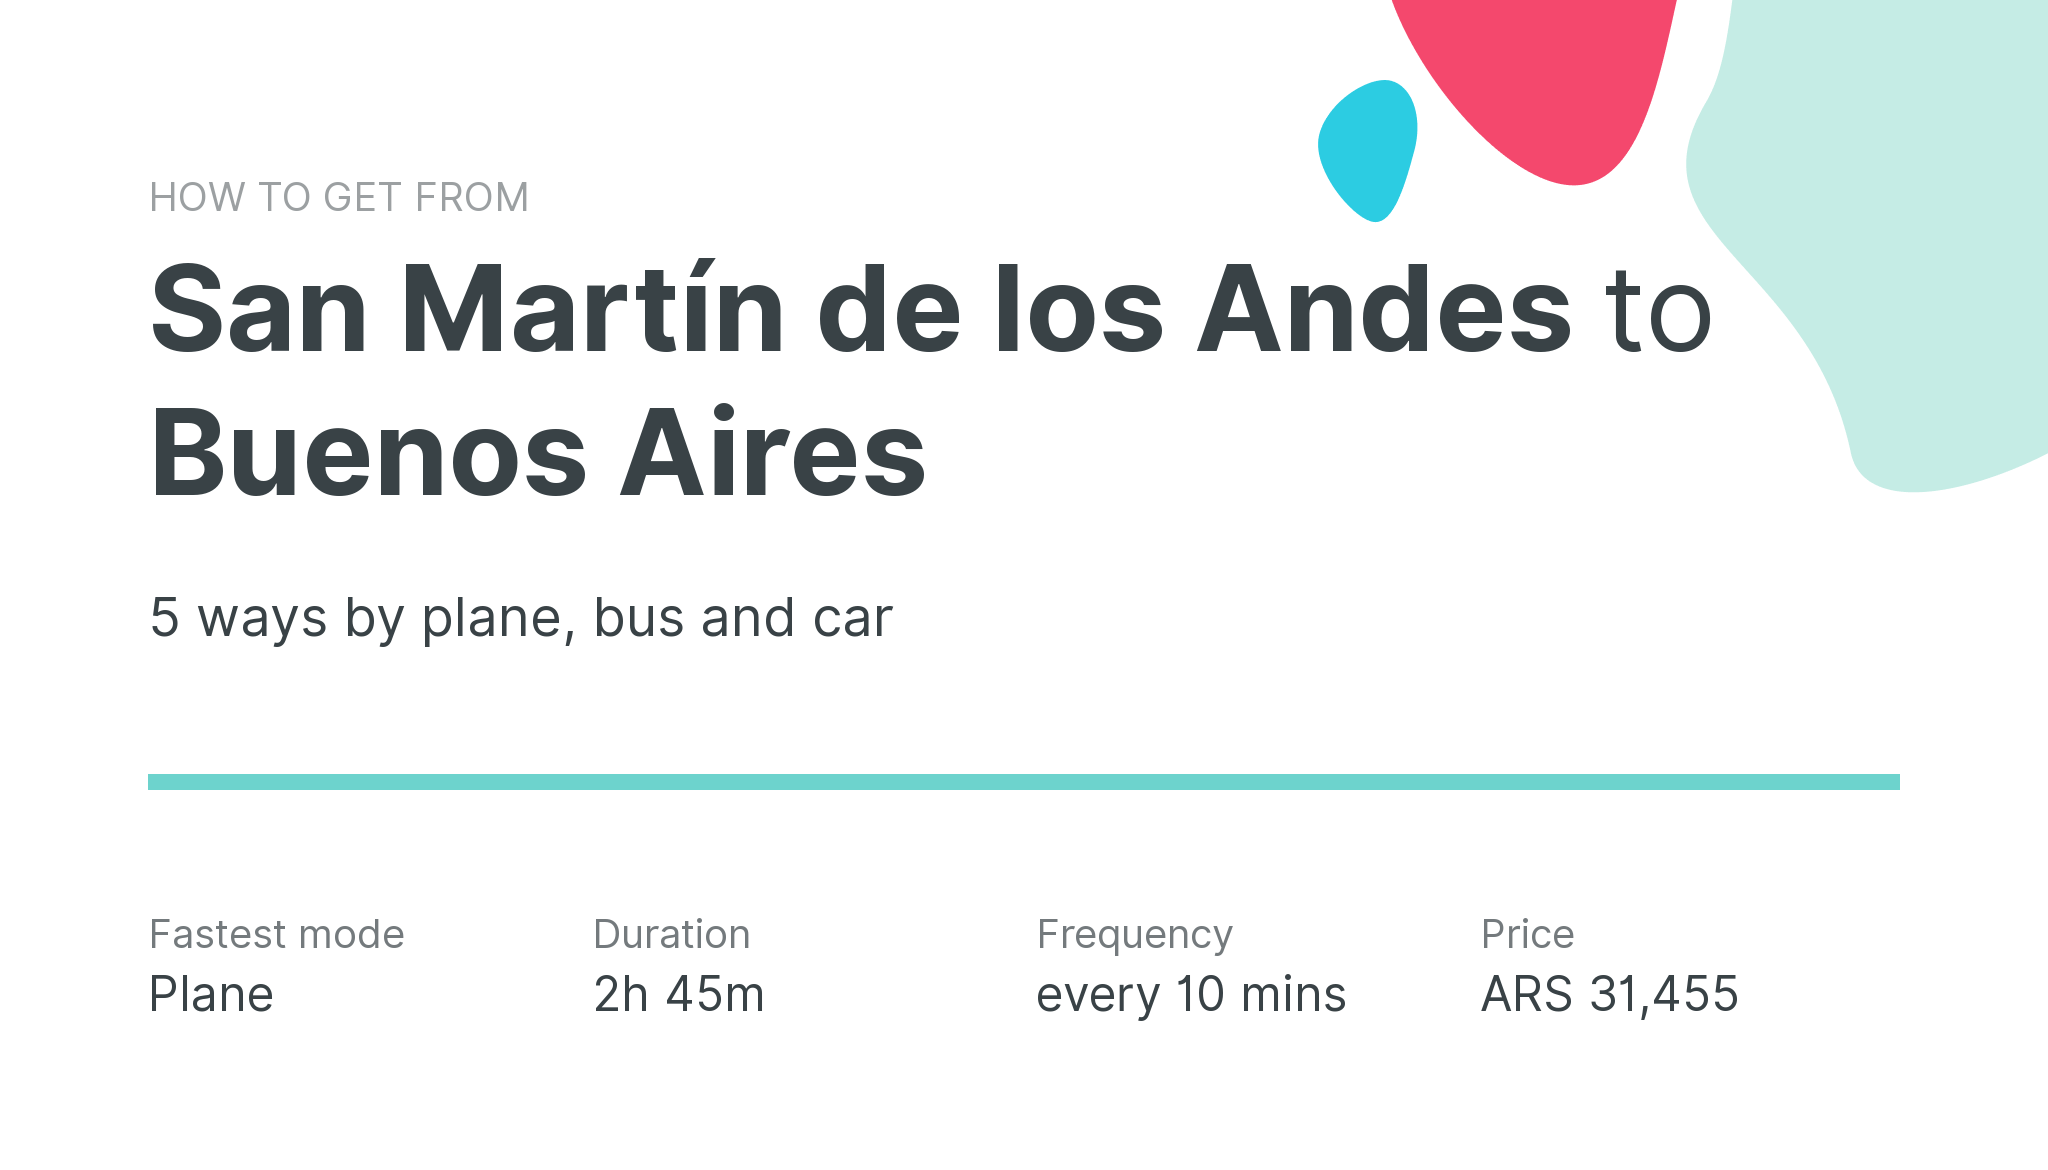 How do I get from San Martín de los Andes to Buenos Aires